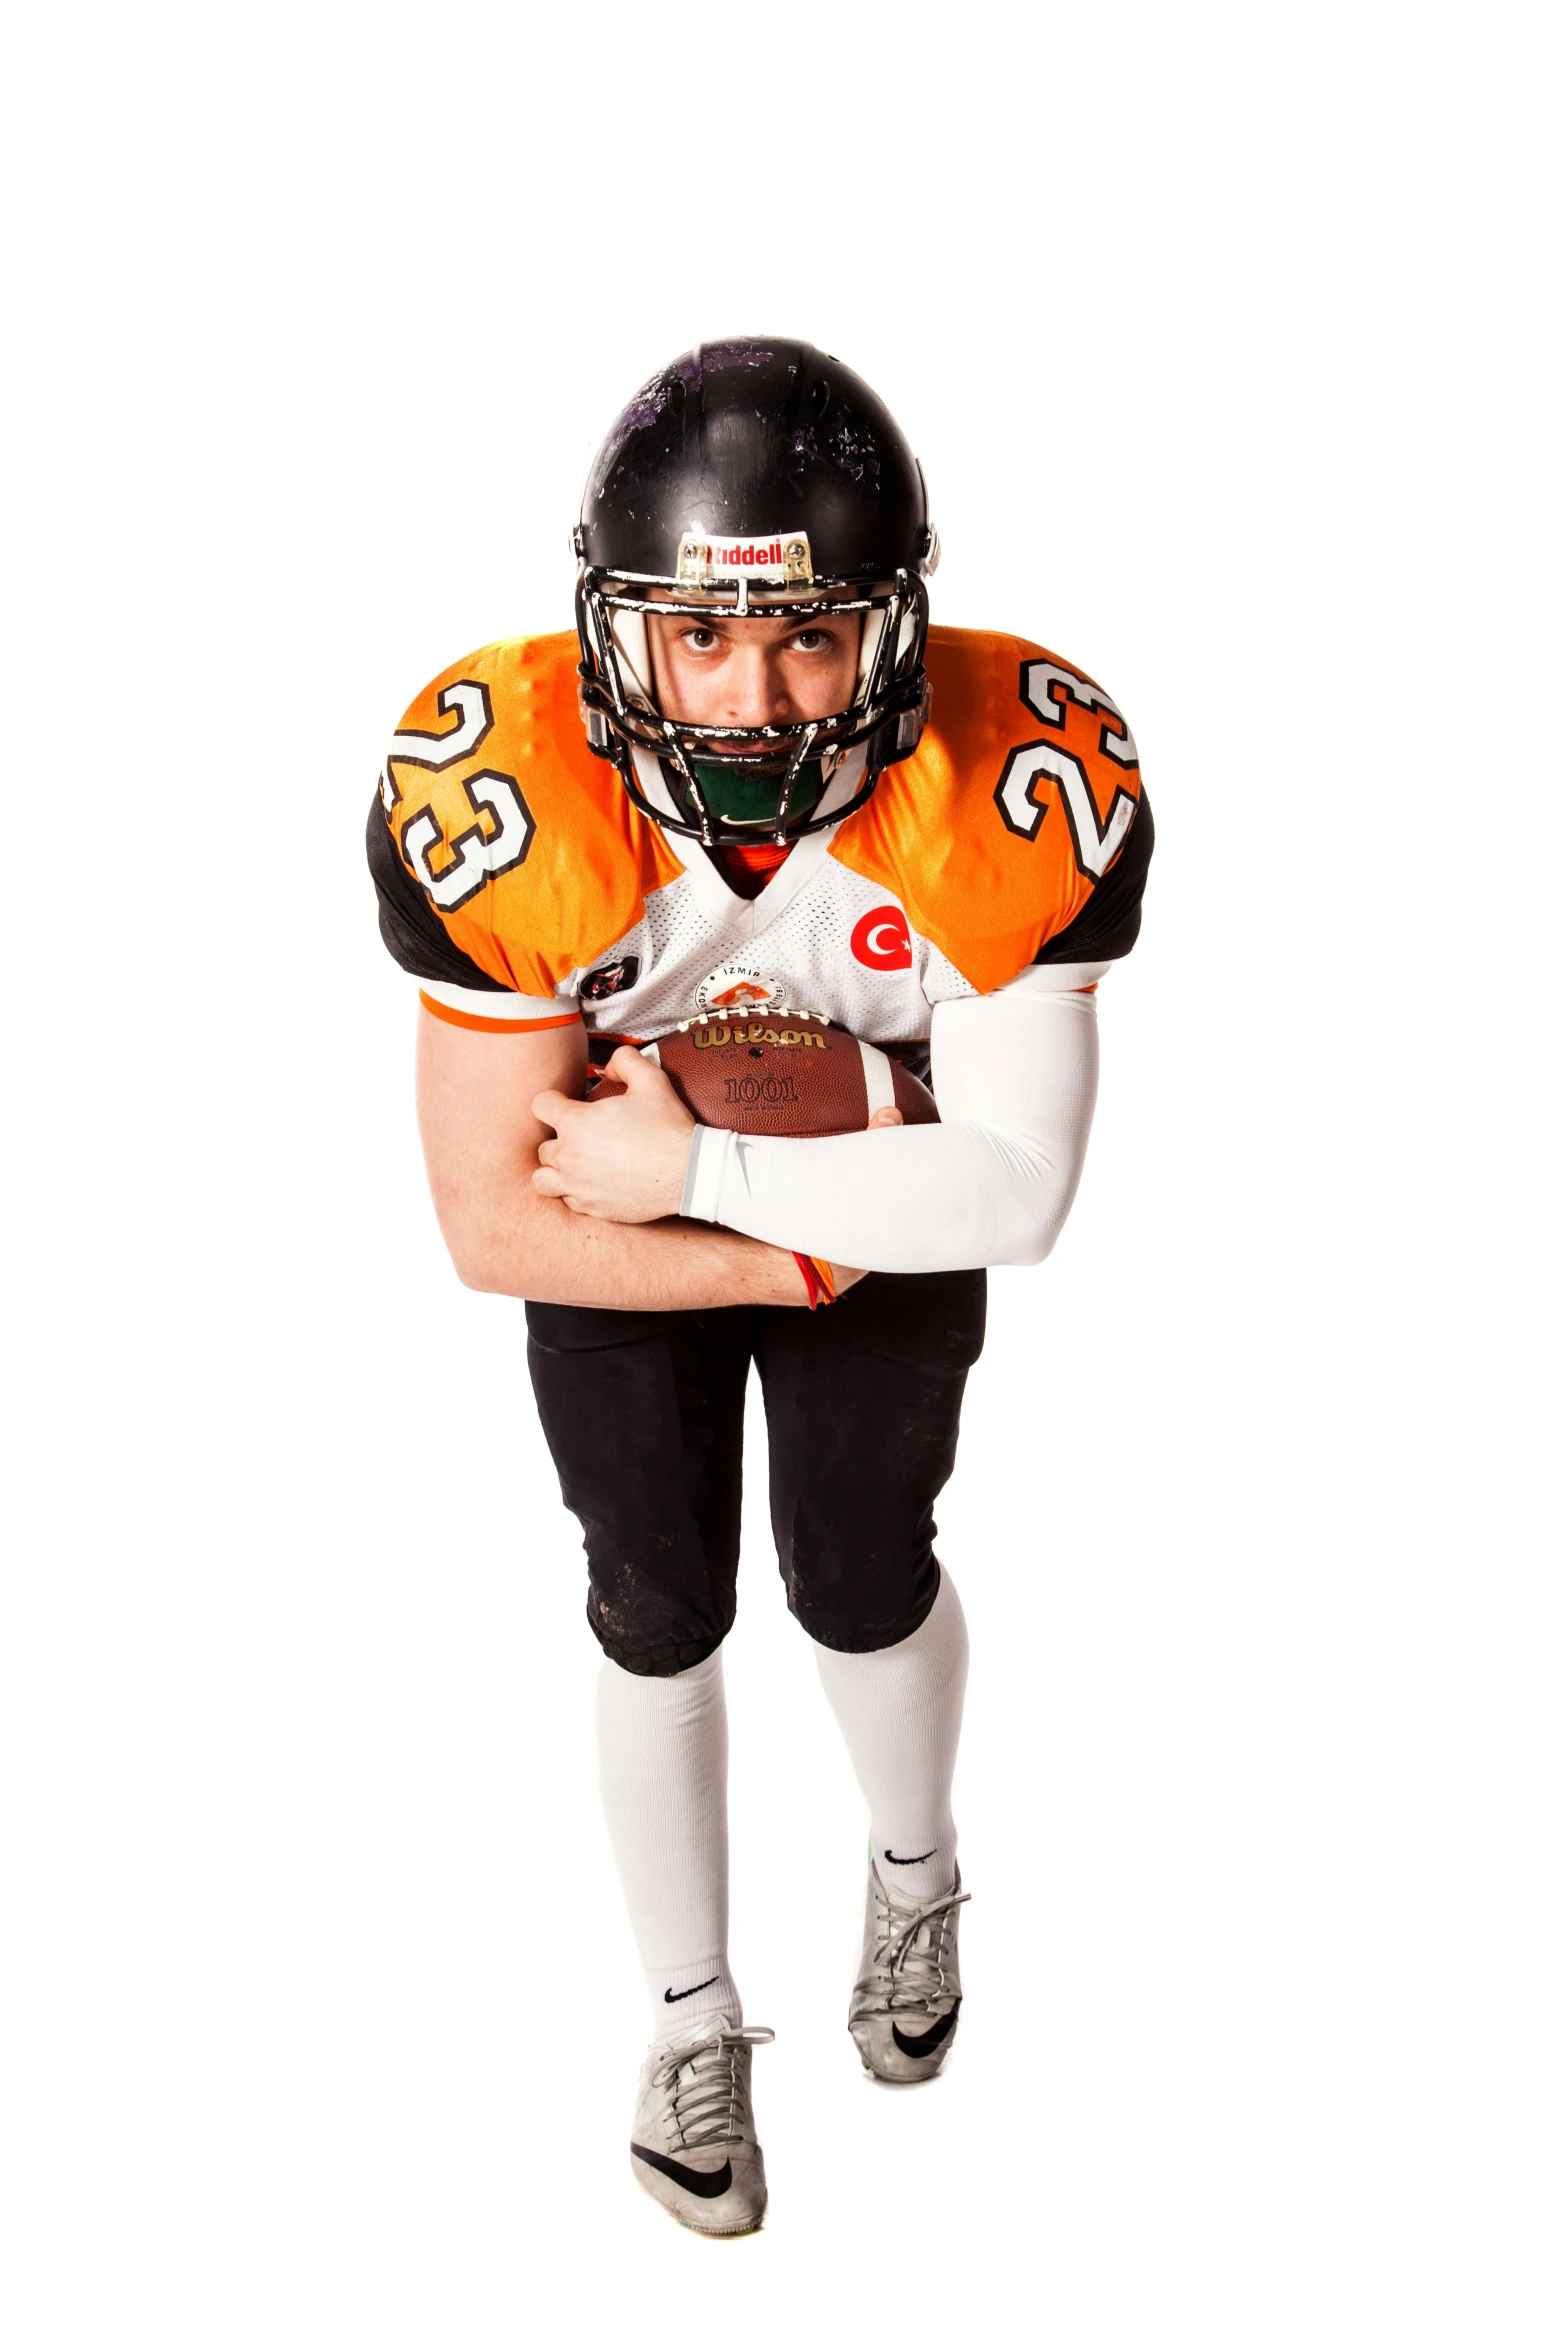 a football player holding onto a ball and posing for the camera